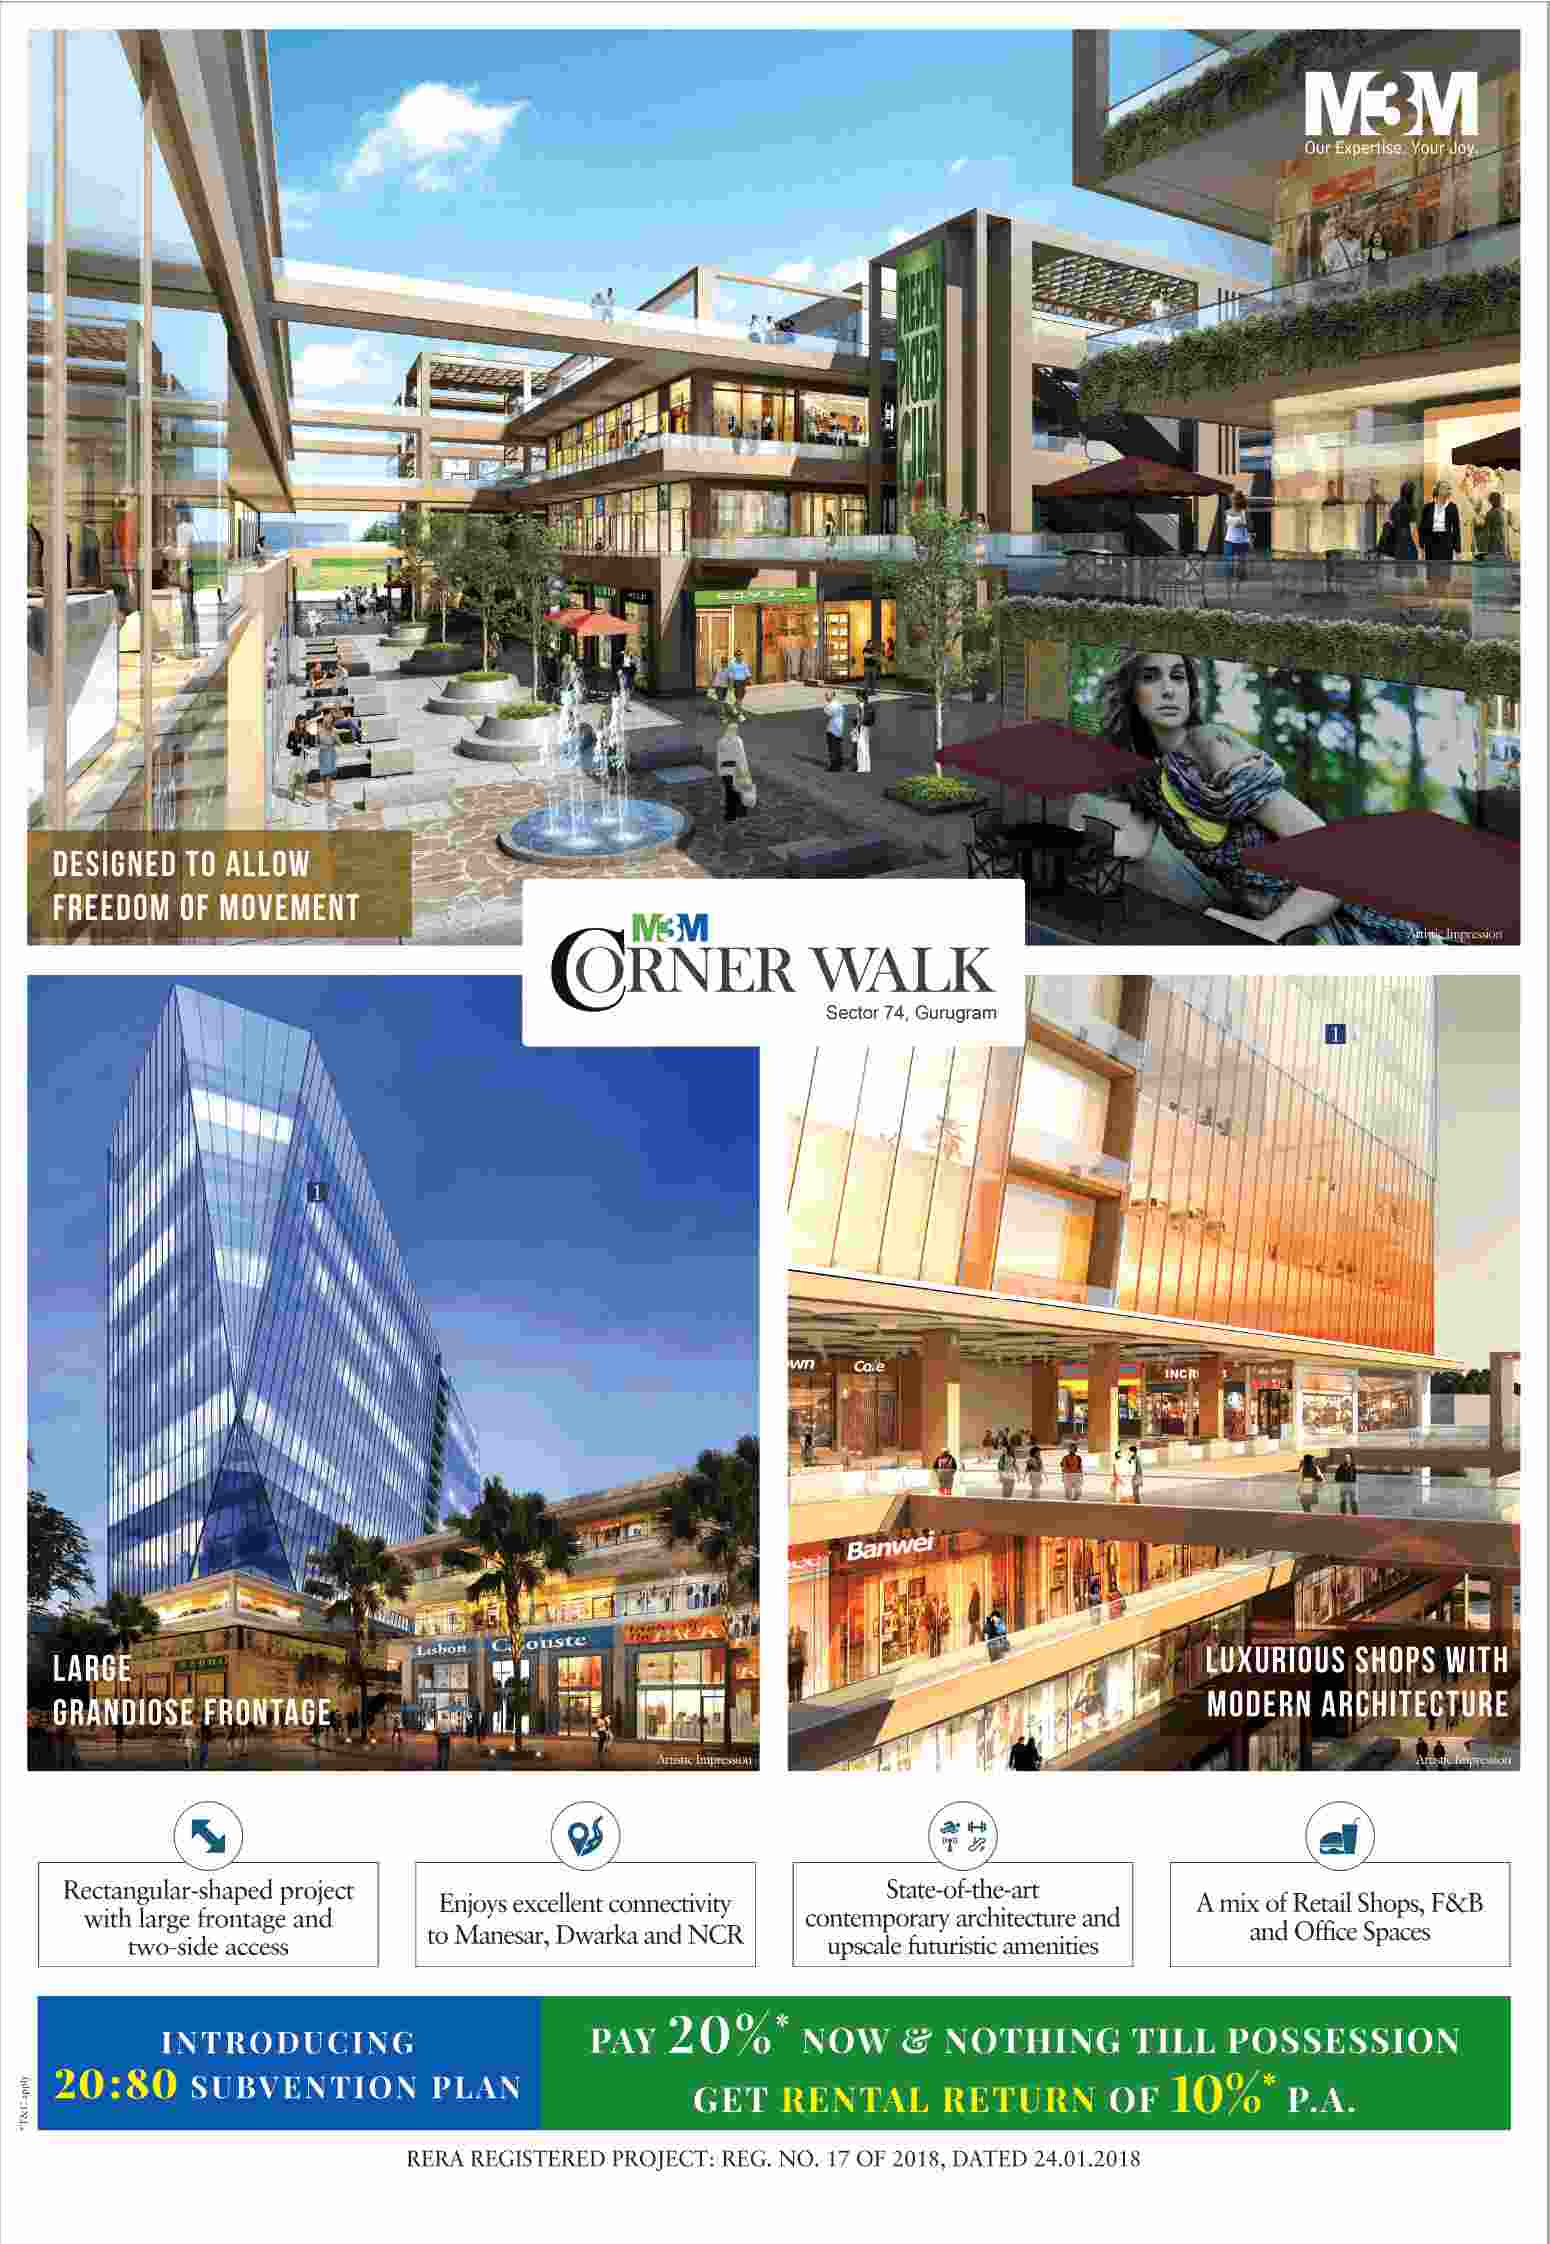 Pay 20% now and nothing till possession at M3M Corner Walk in Gurgaon Update